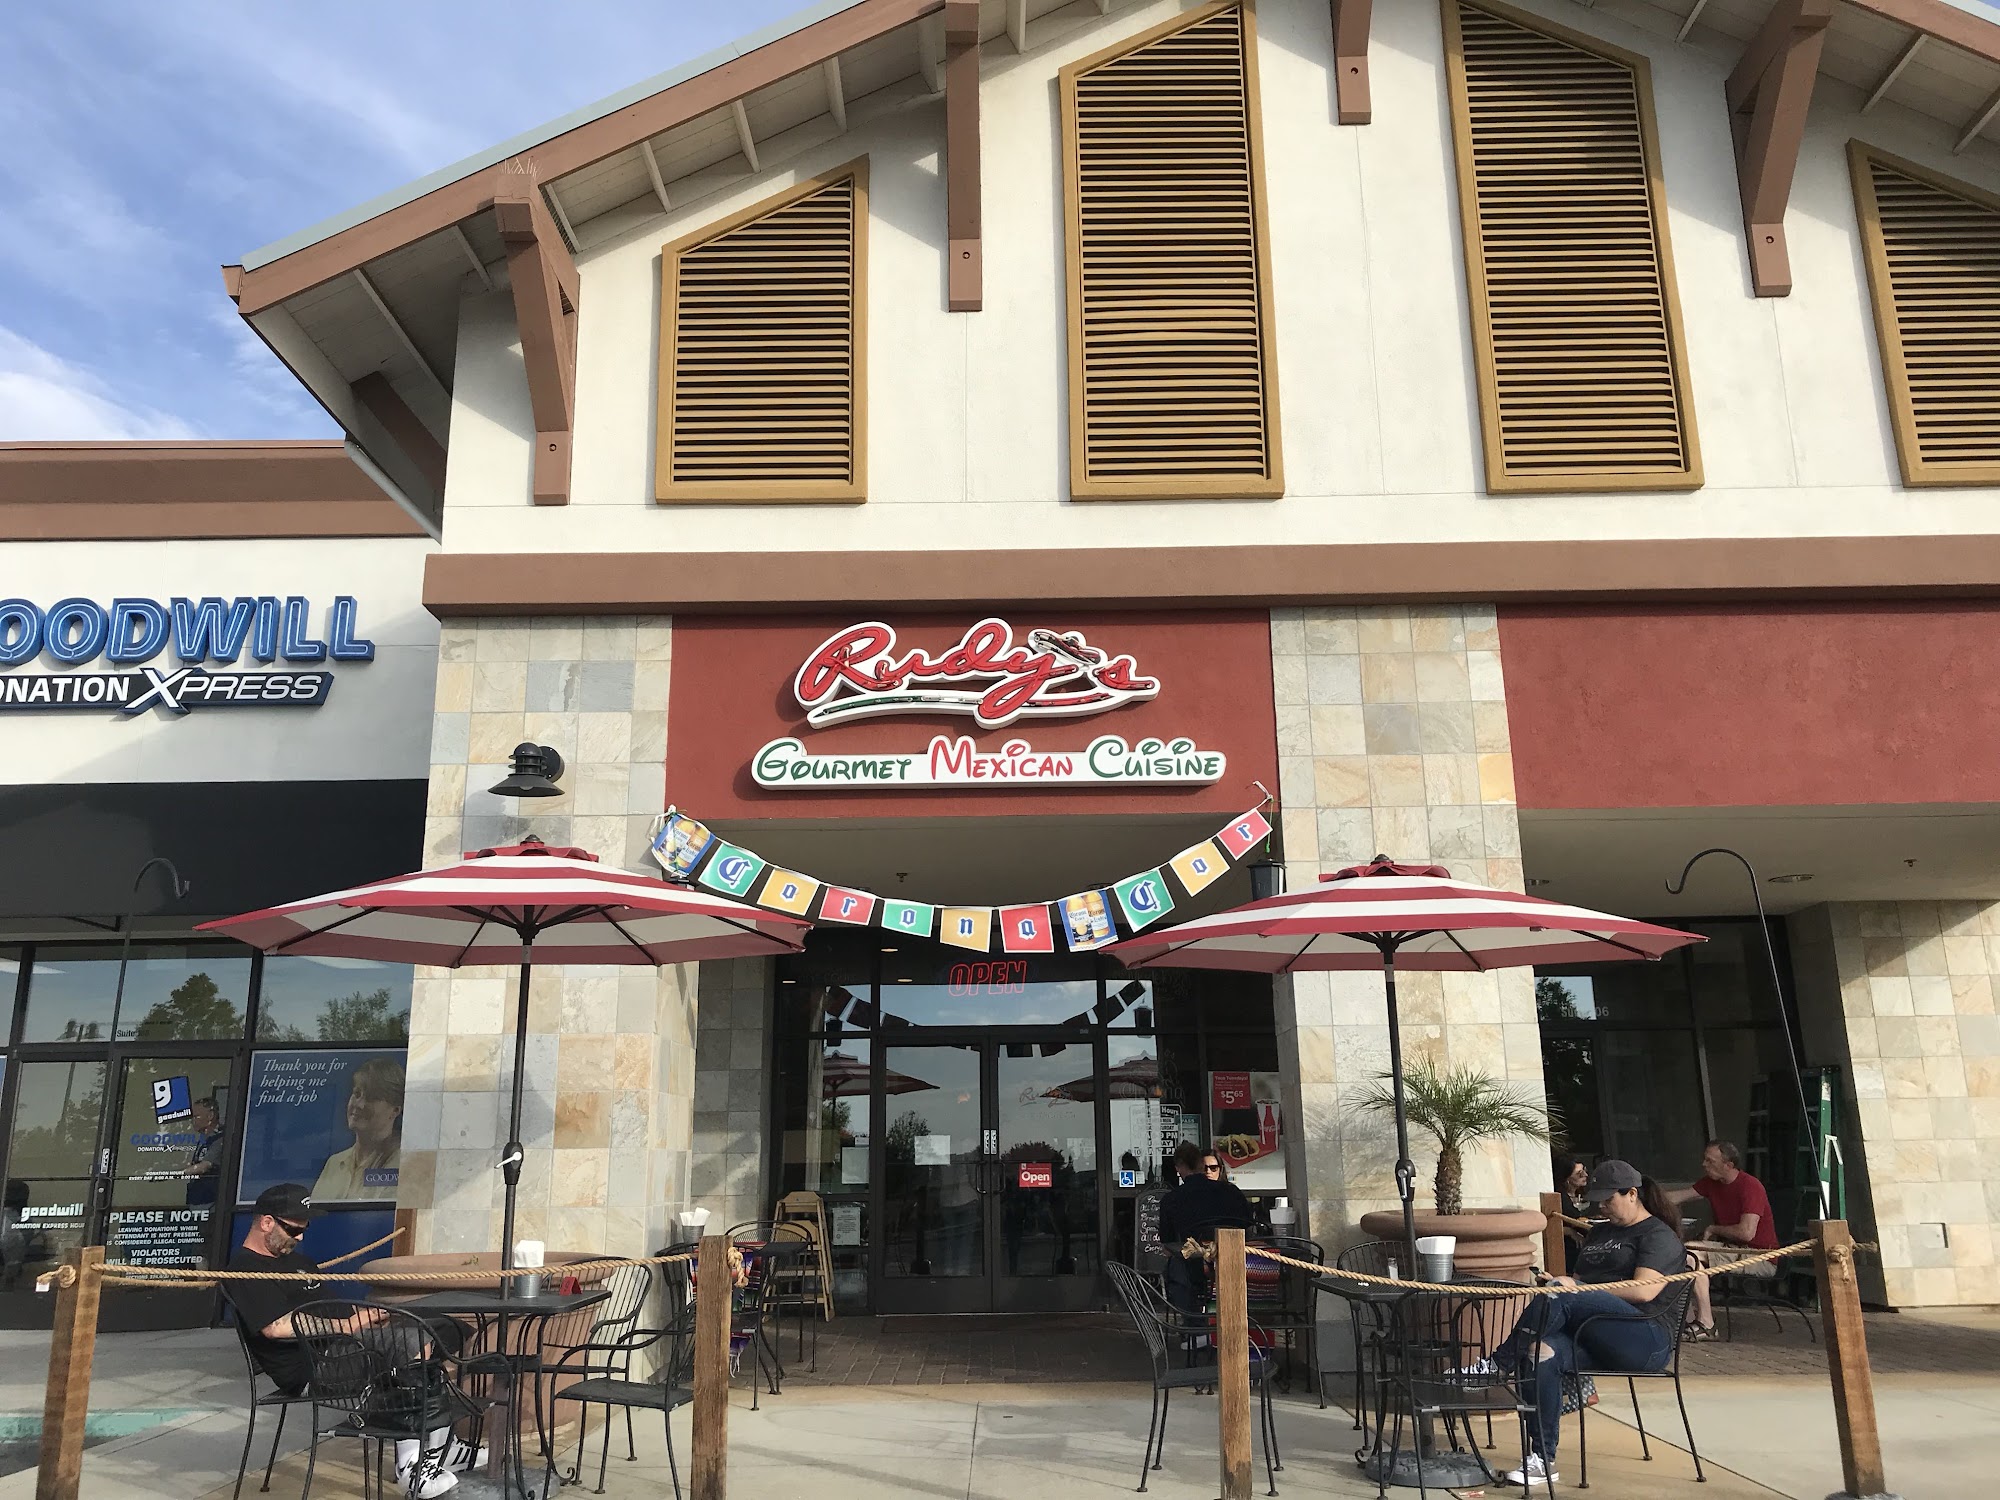 Rudy's Gourmet Mexican